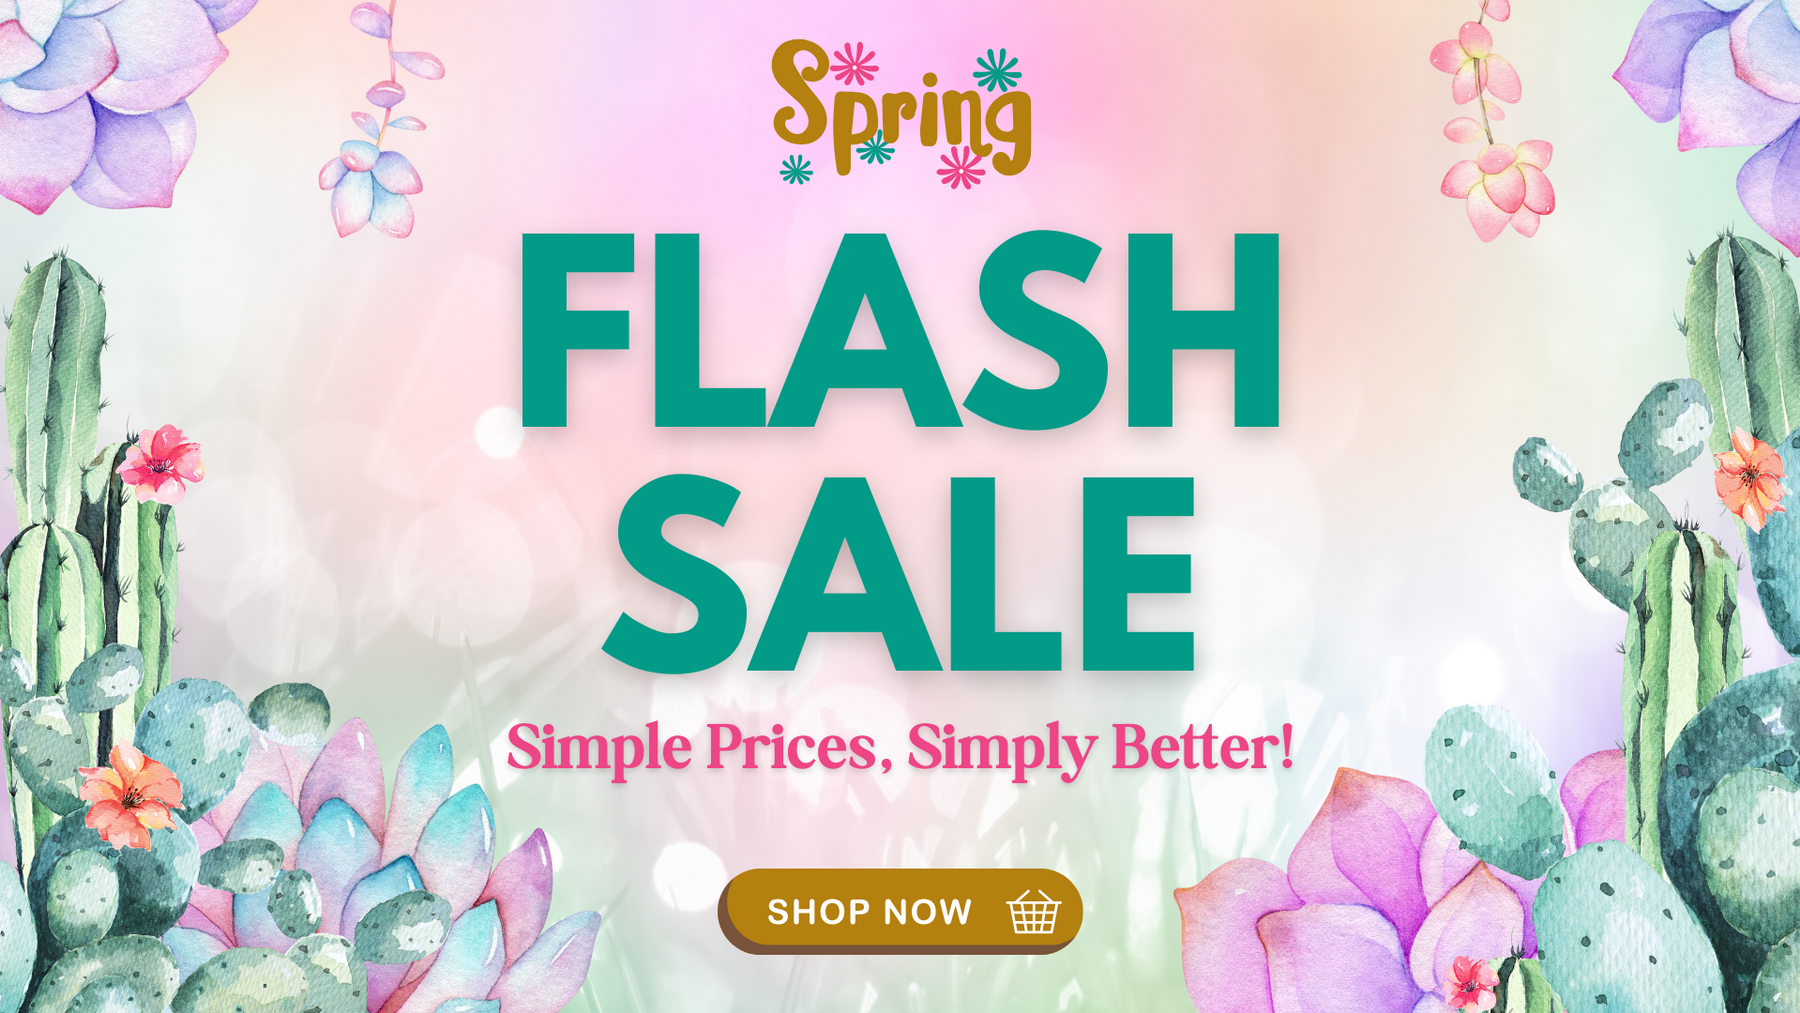 Blooming Deals in a Flash Sale! Don't Miss Out on the Season's Hottest Savings!